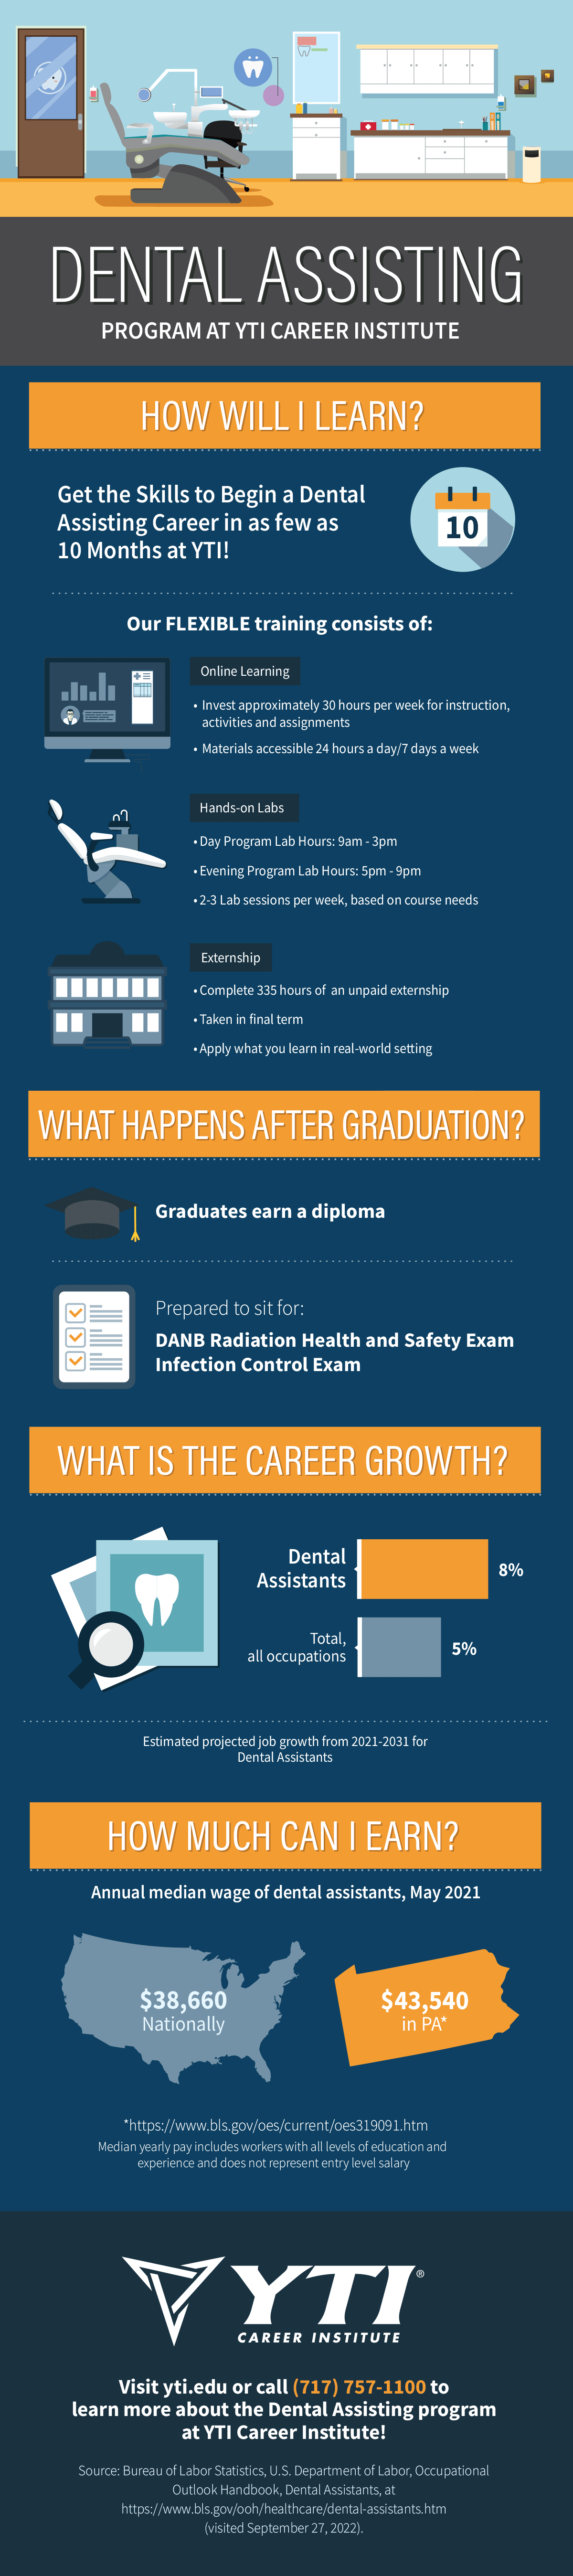 Dental Assisting Program Facts Infographic